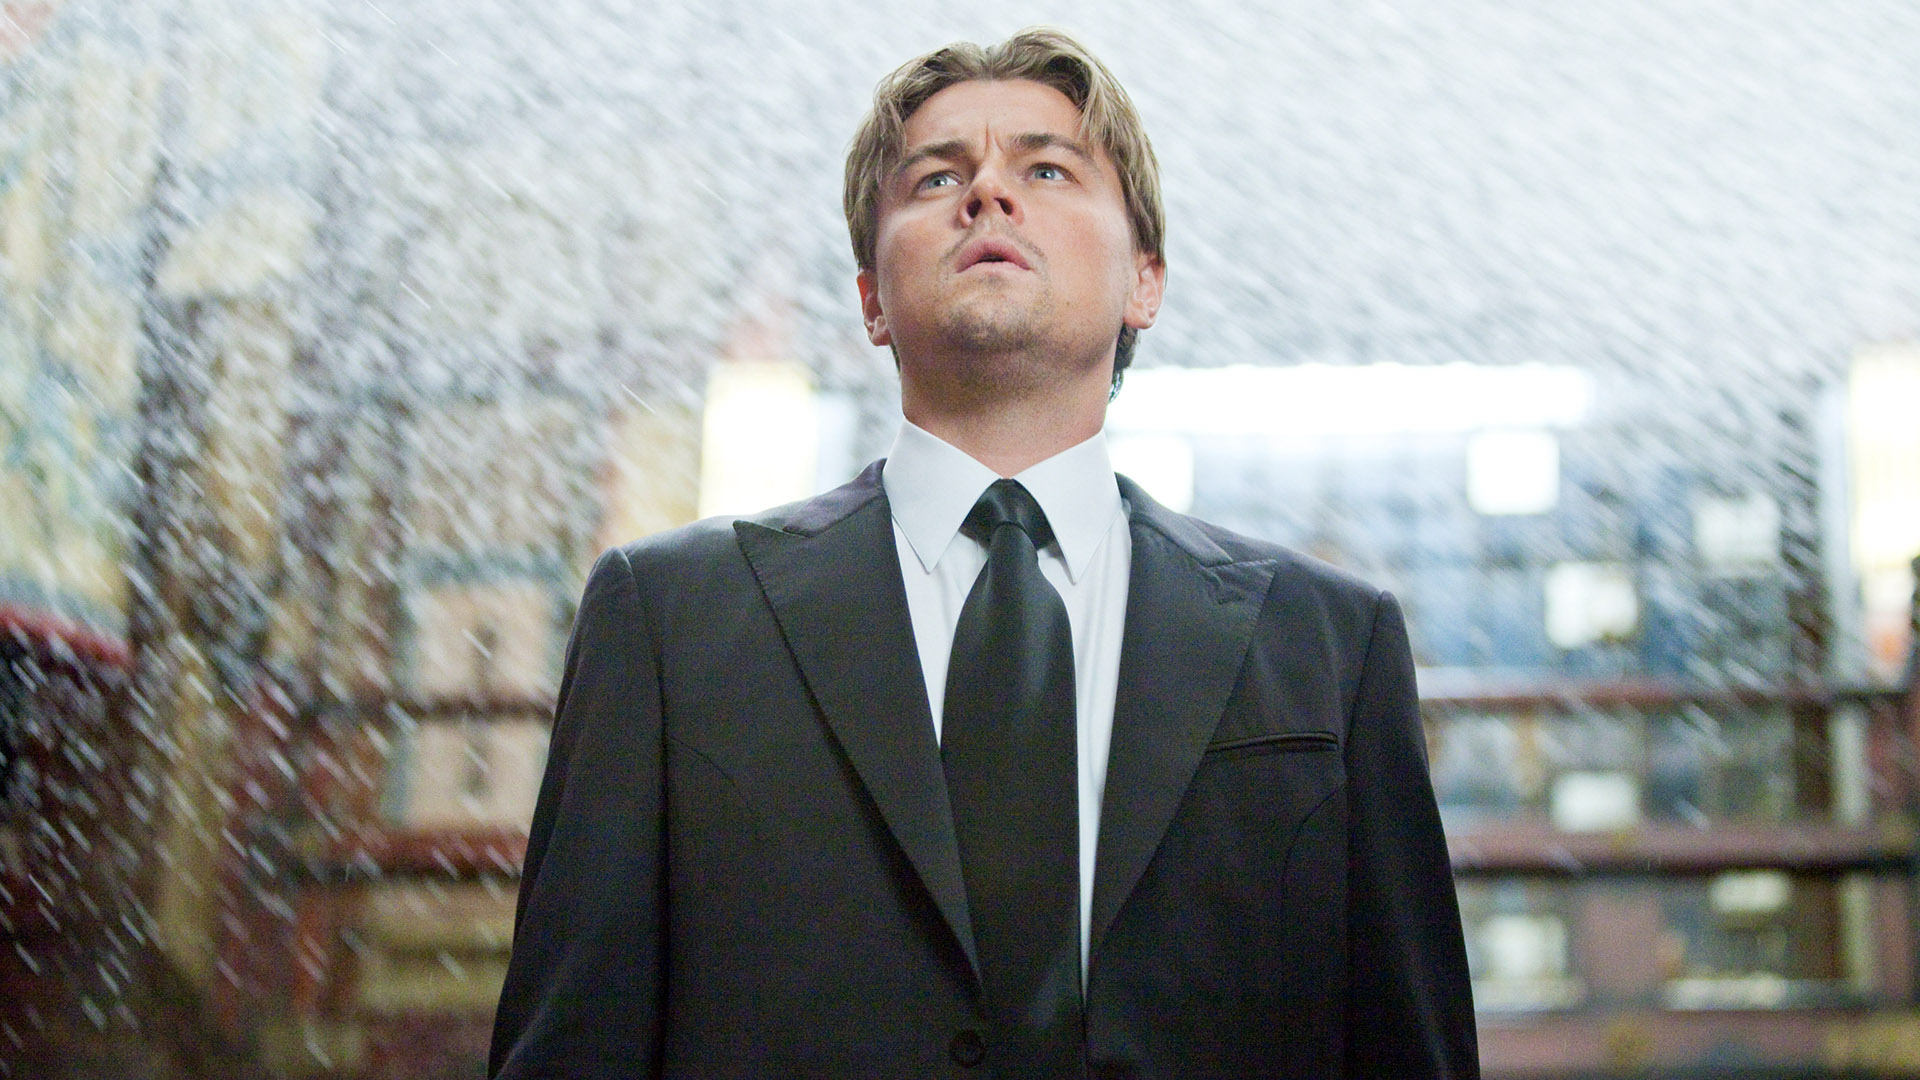 10 Lesser-Known Movies to Watch if You Loved Inception